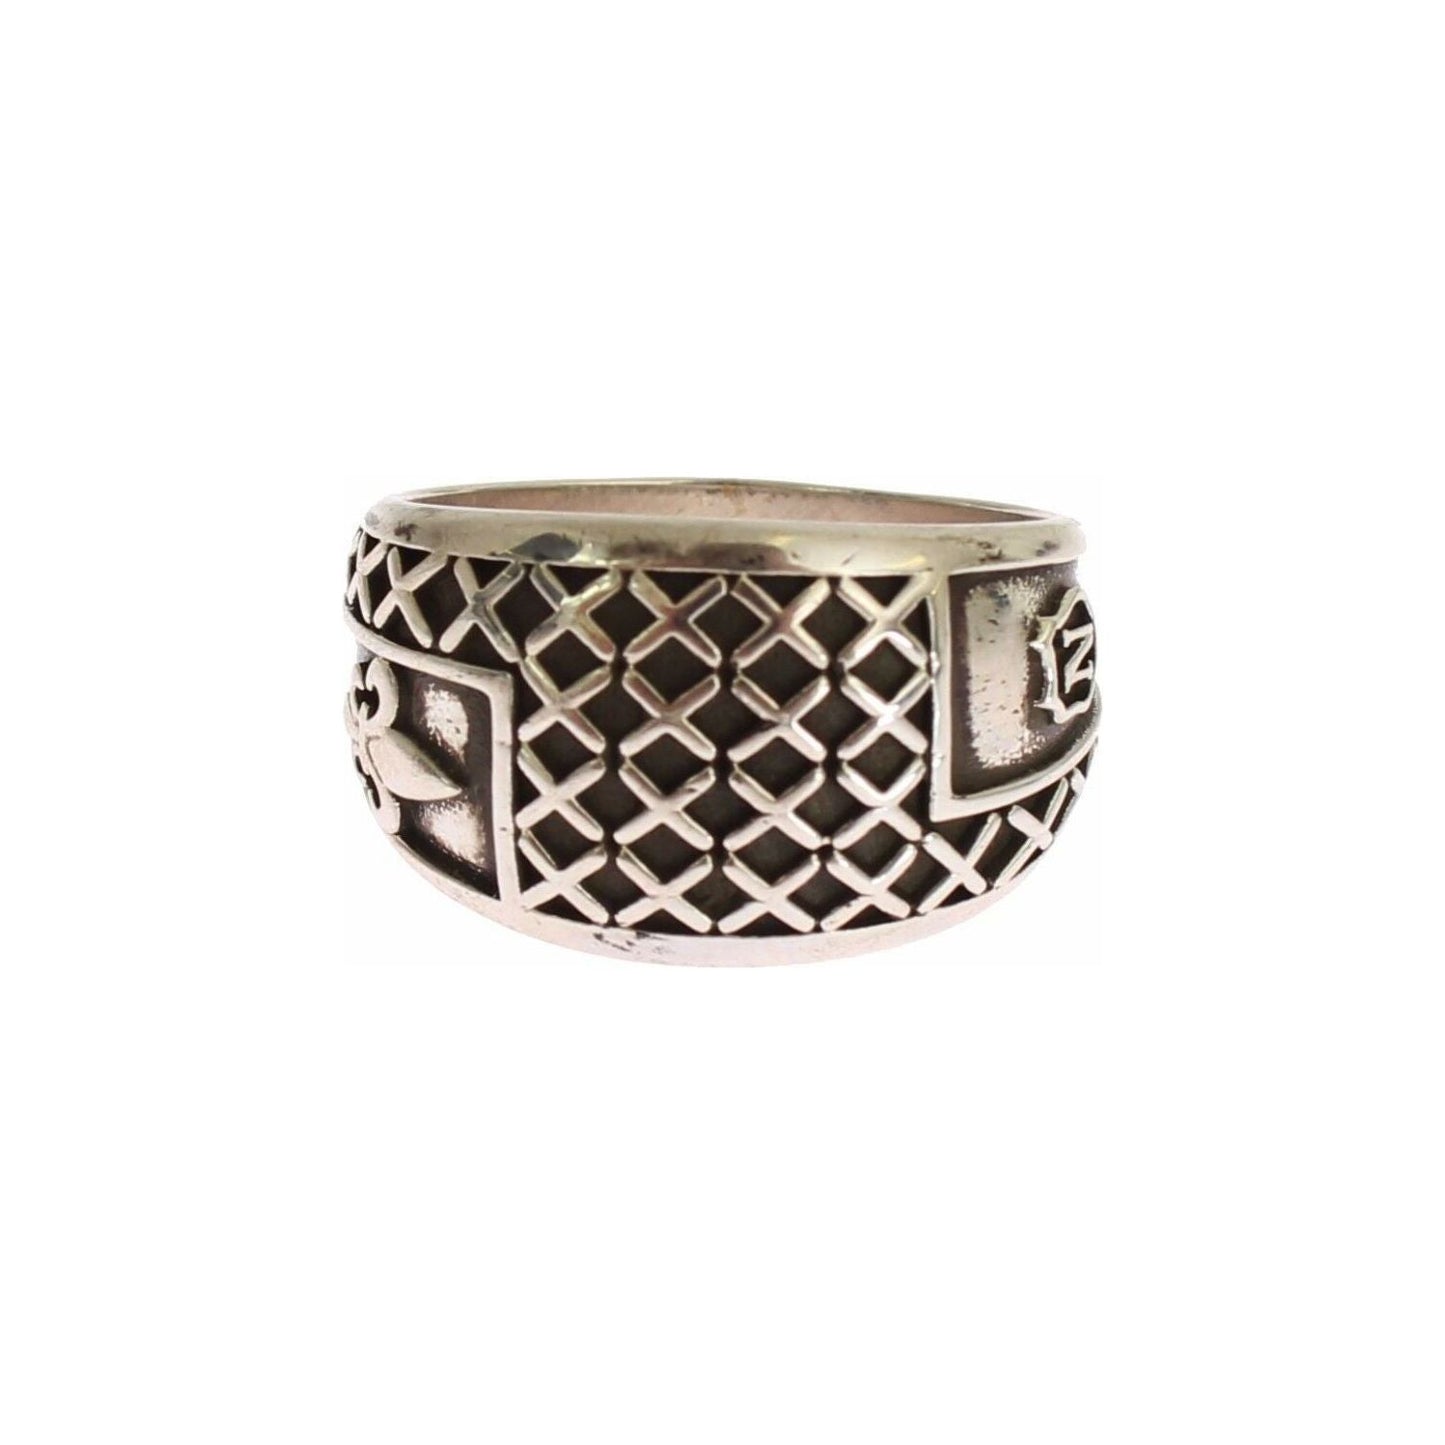 Nialaya Elegant Silver Band with Black Accents silver-rhodium-925-sterling-ring Ring s-l1600-21-2-9481a289-38e_cab38f4d-2ed5-4285-b0f2-00c404d0a941.jpg